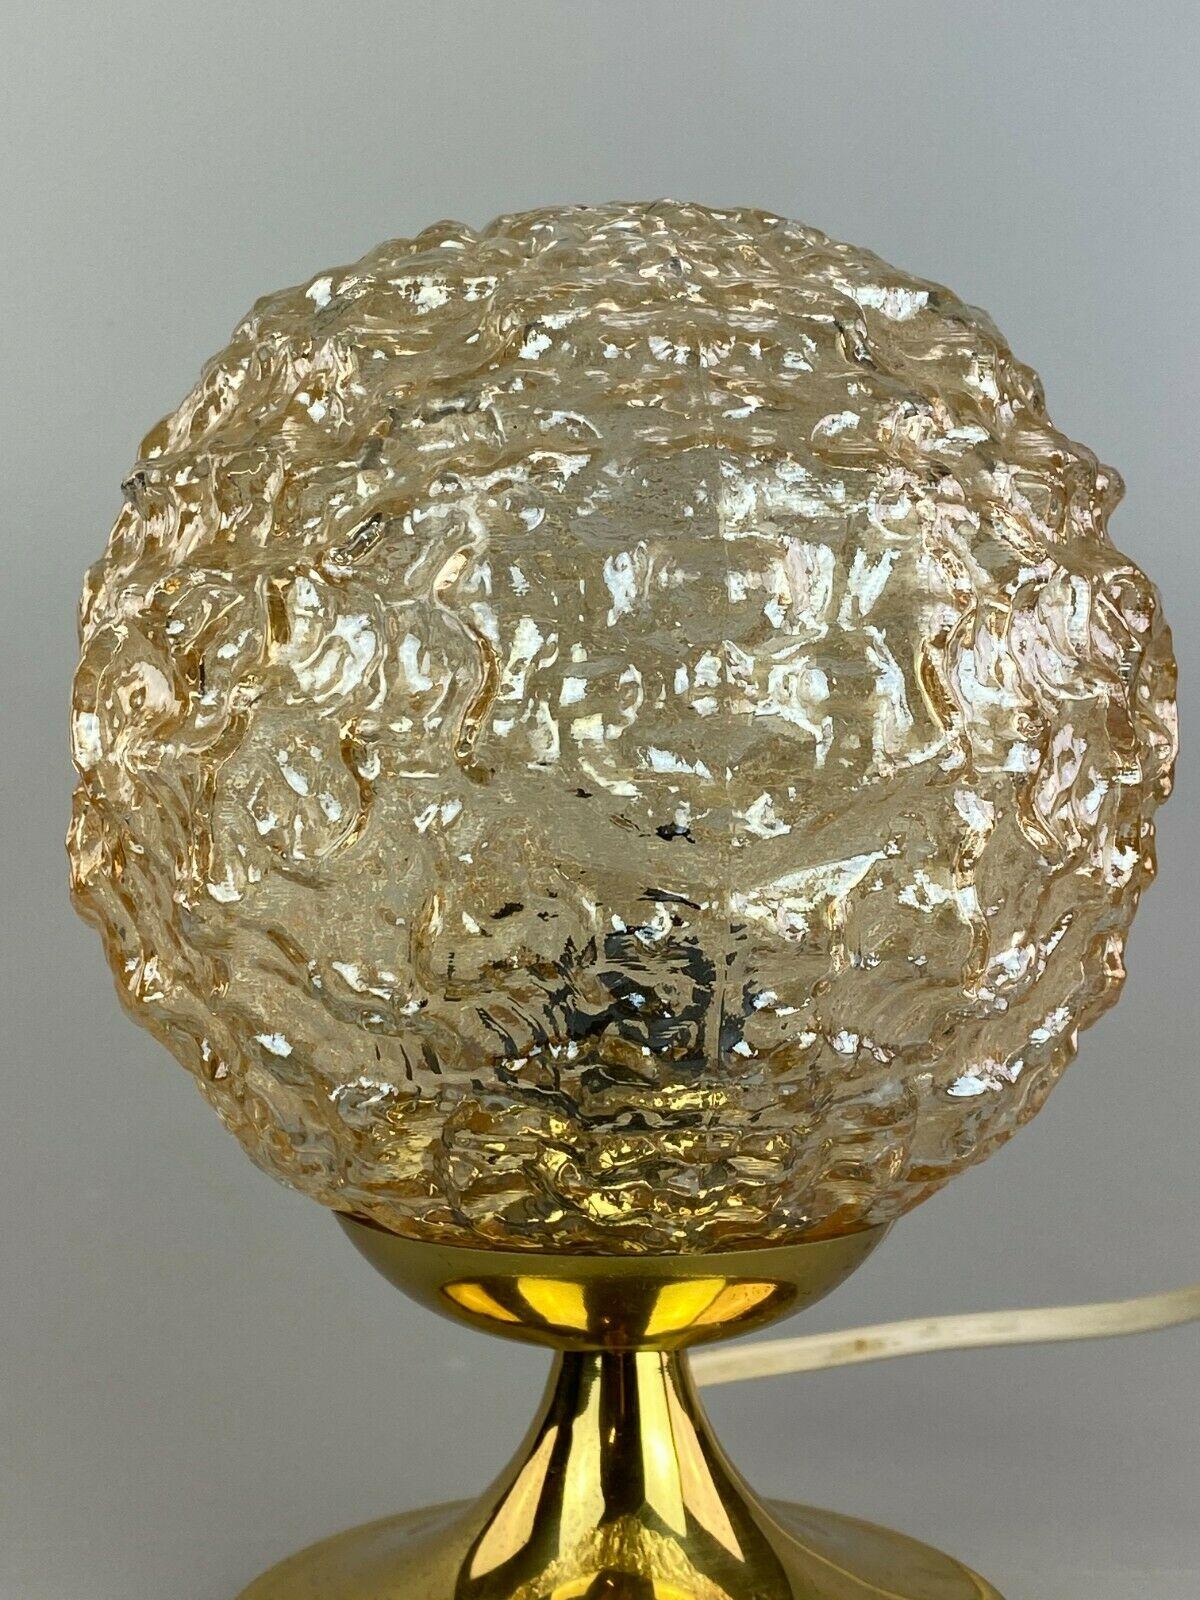 60s 70s Ball Lamp Light Table Lamp Bedside Lamp Space Age Design 2